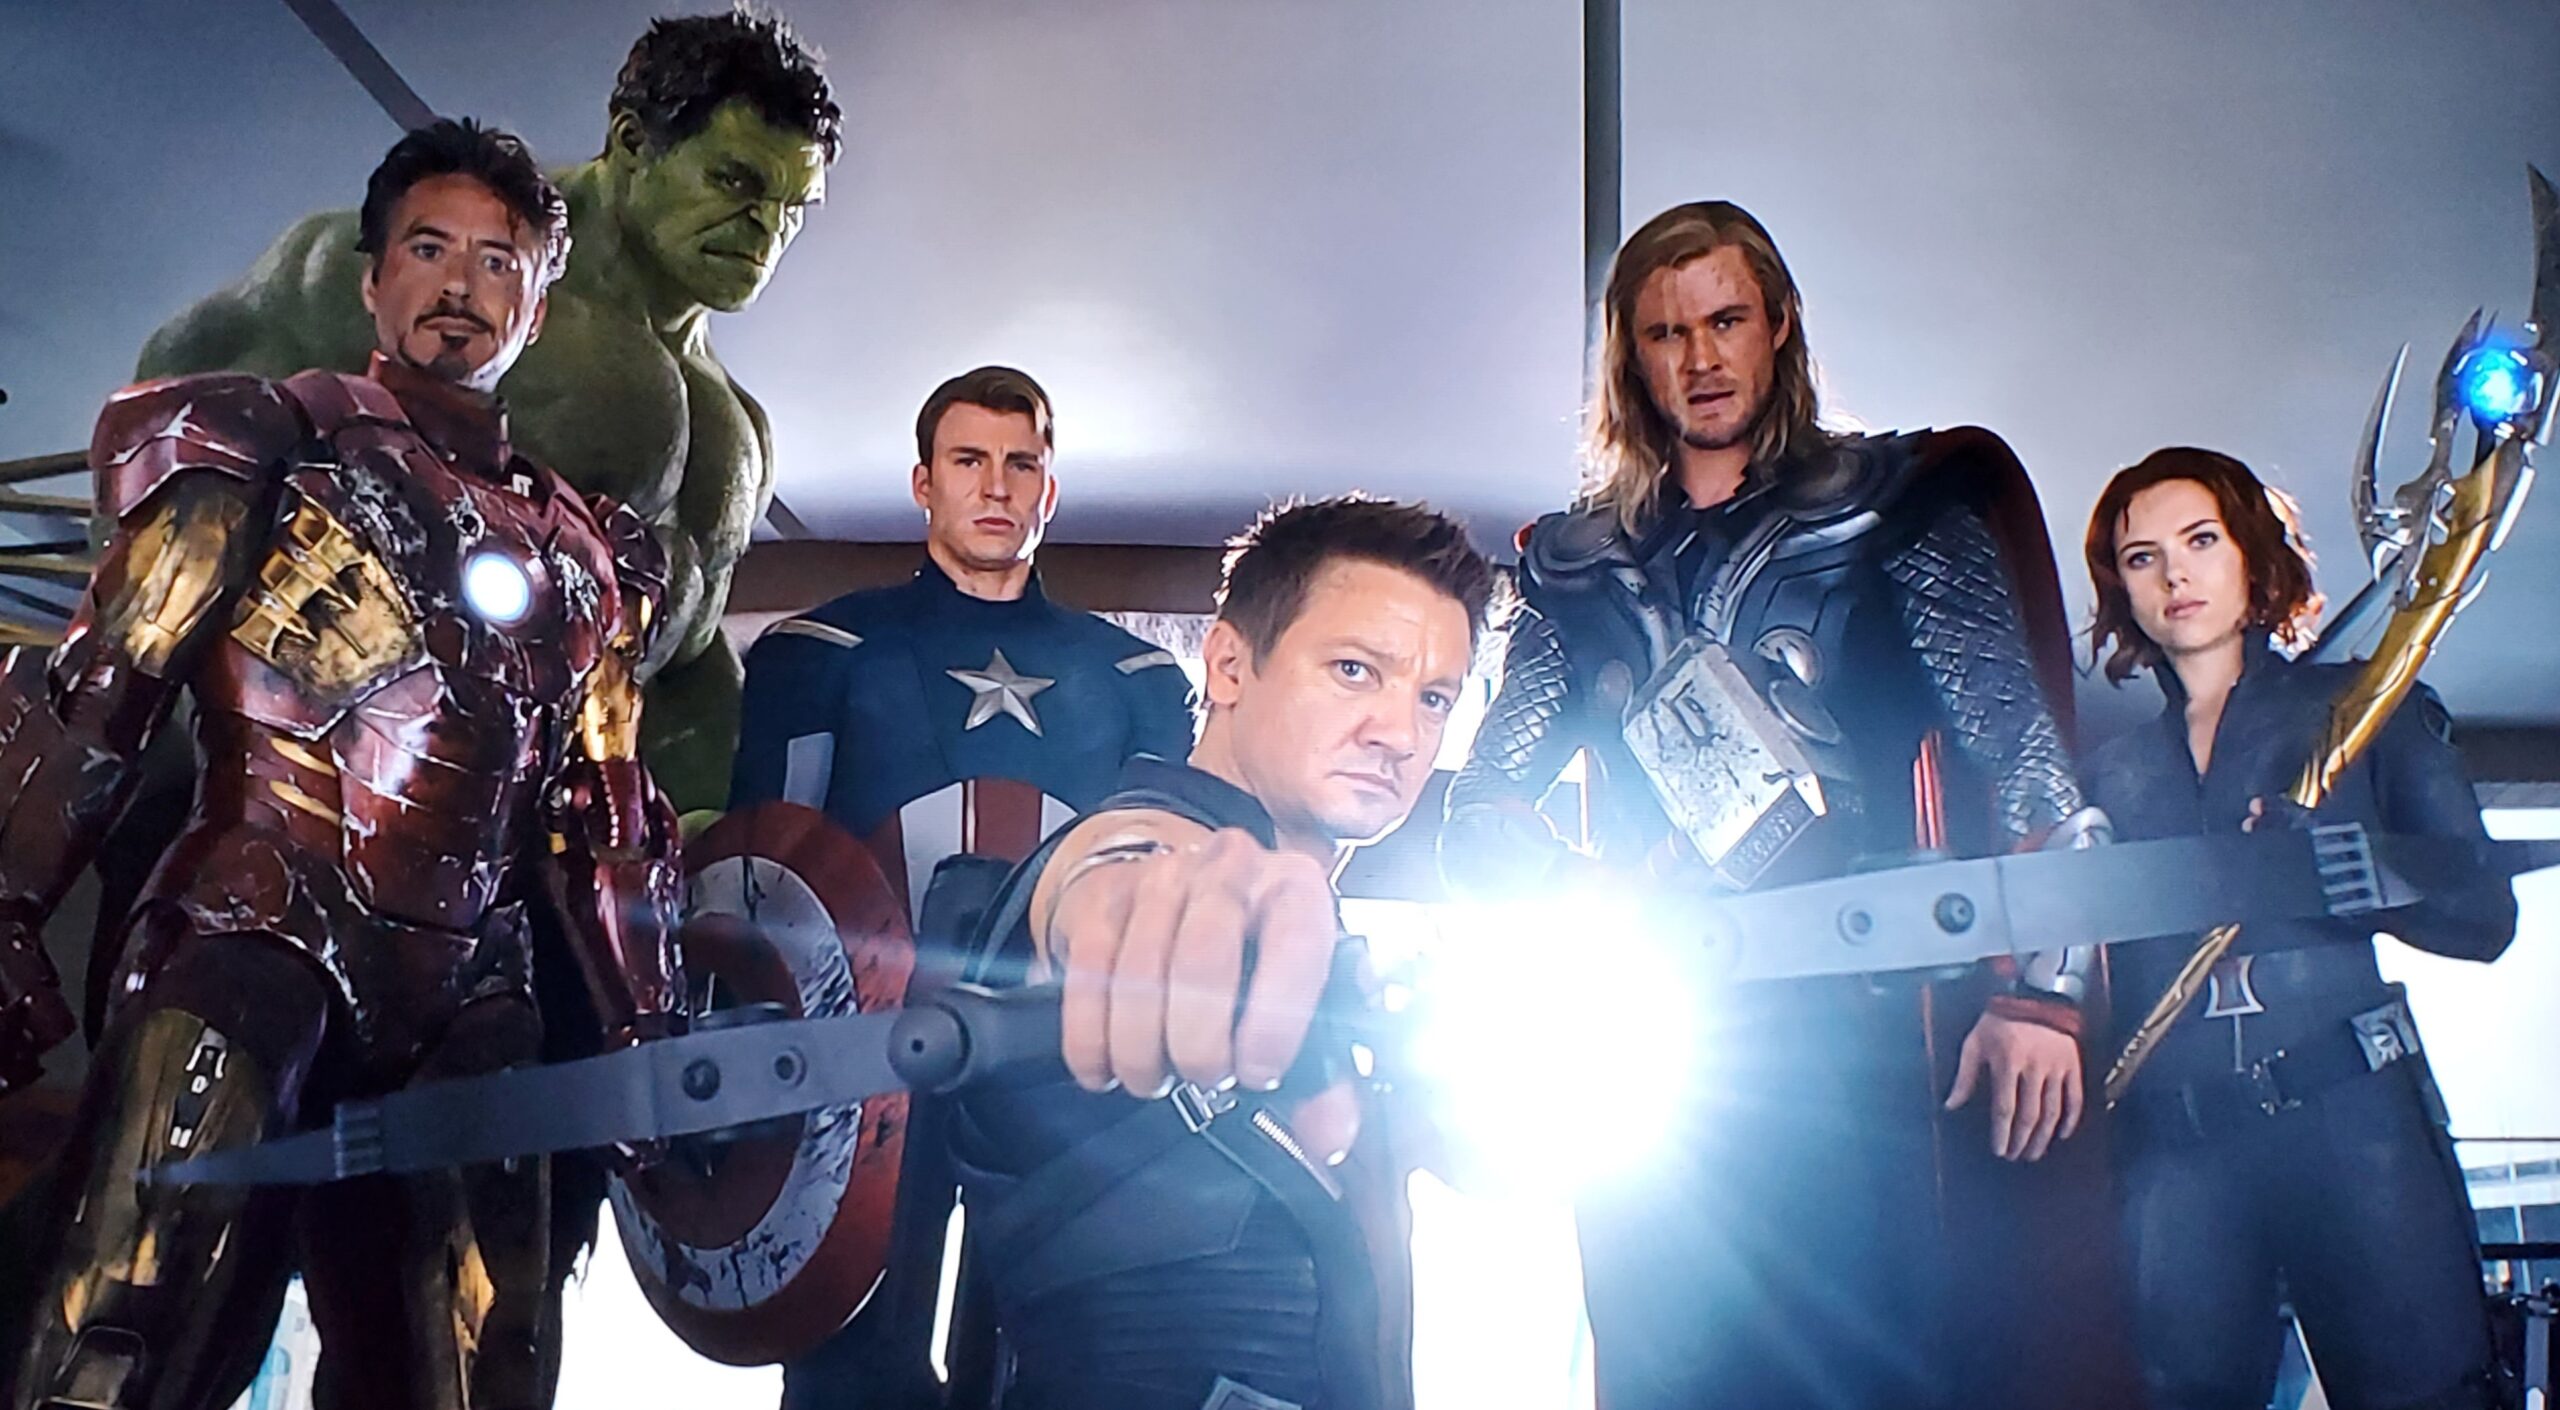 The original six cast of 2012 film Avengers, Chris Evans, Robert Downey Jr., Mark Ruffalo, Scarlett Johansson, and Jeremy Renner, who played Captain America, Iron Man, Hulk, Black Widow, and Hawkeye in the 2012 superhero film respectively, reunited for the first time in nearly six years to dub the film in native Lakota language. 'one more time'